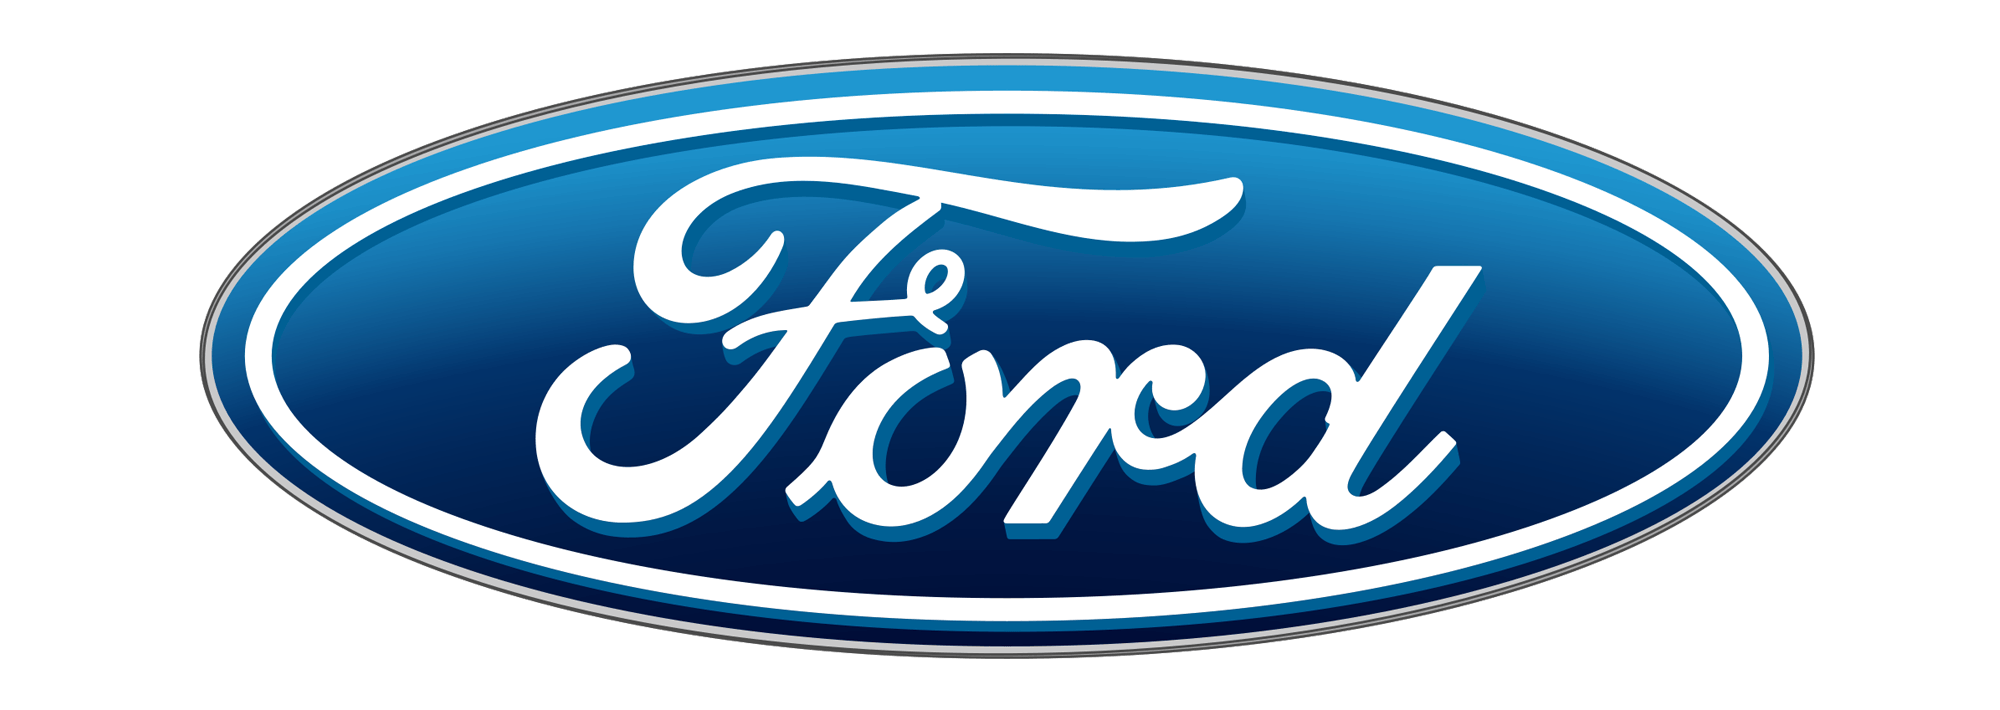 Brand with Blue Oval Logo - Ford Logo Meaning and History, latest models | World Cars Brands